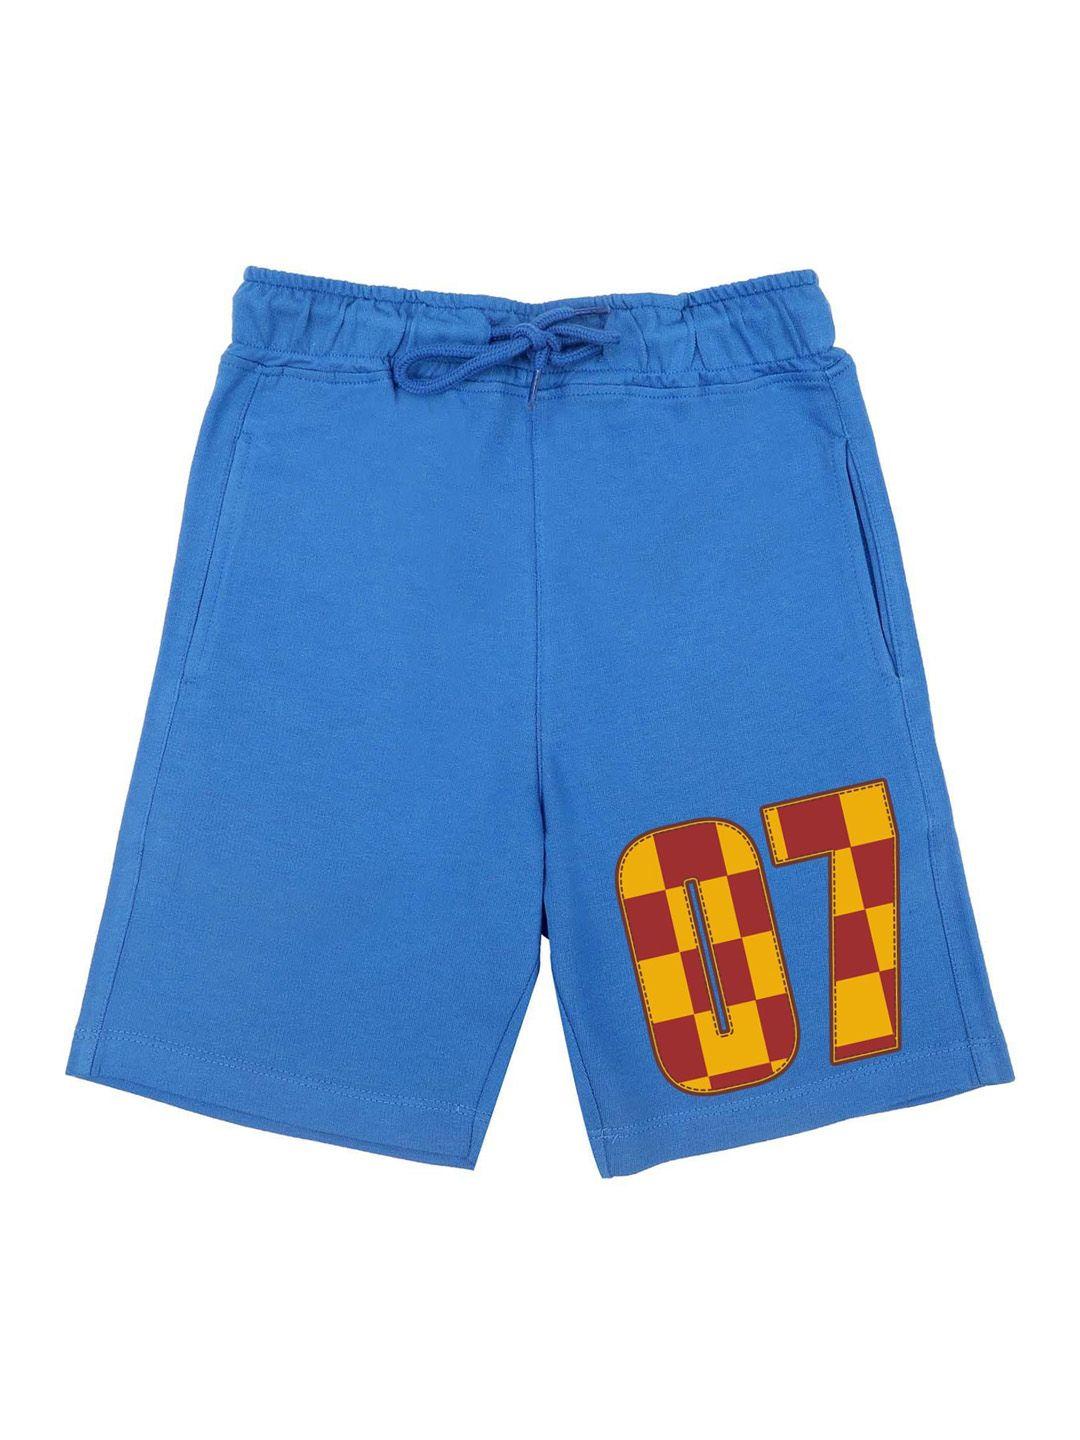 harry-potter-by-wear-your-mind-boys-blue-&-yellow-harry-potter-printed-shorts